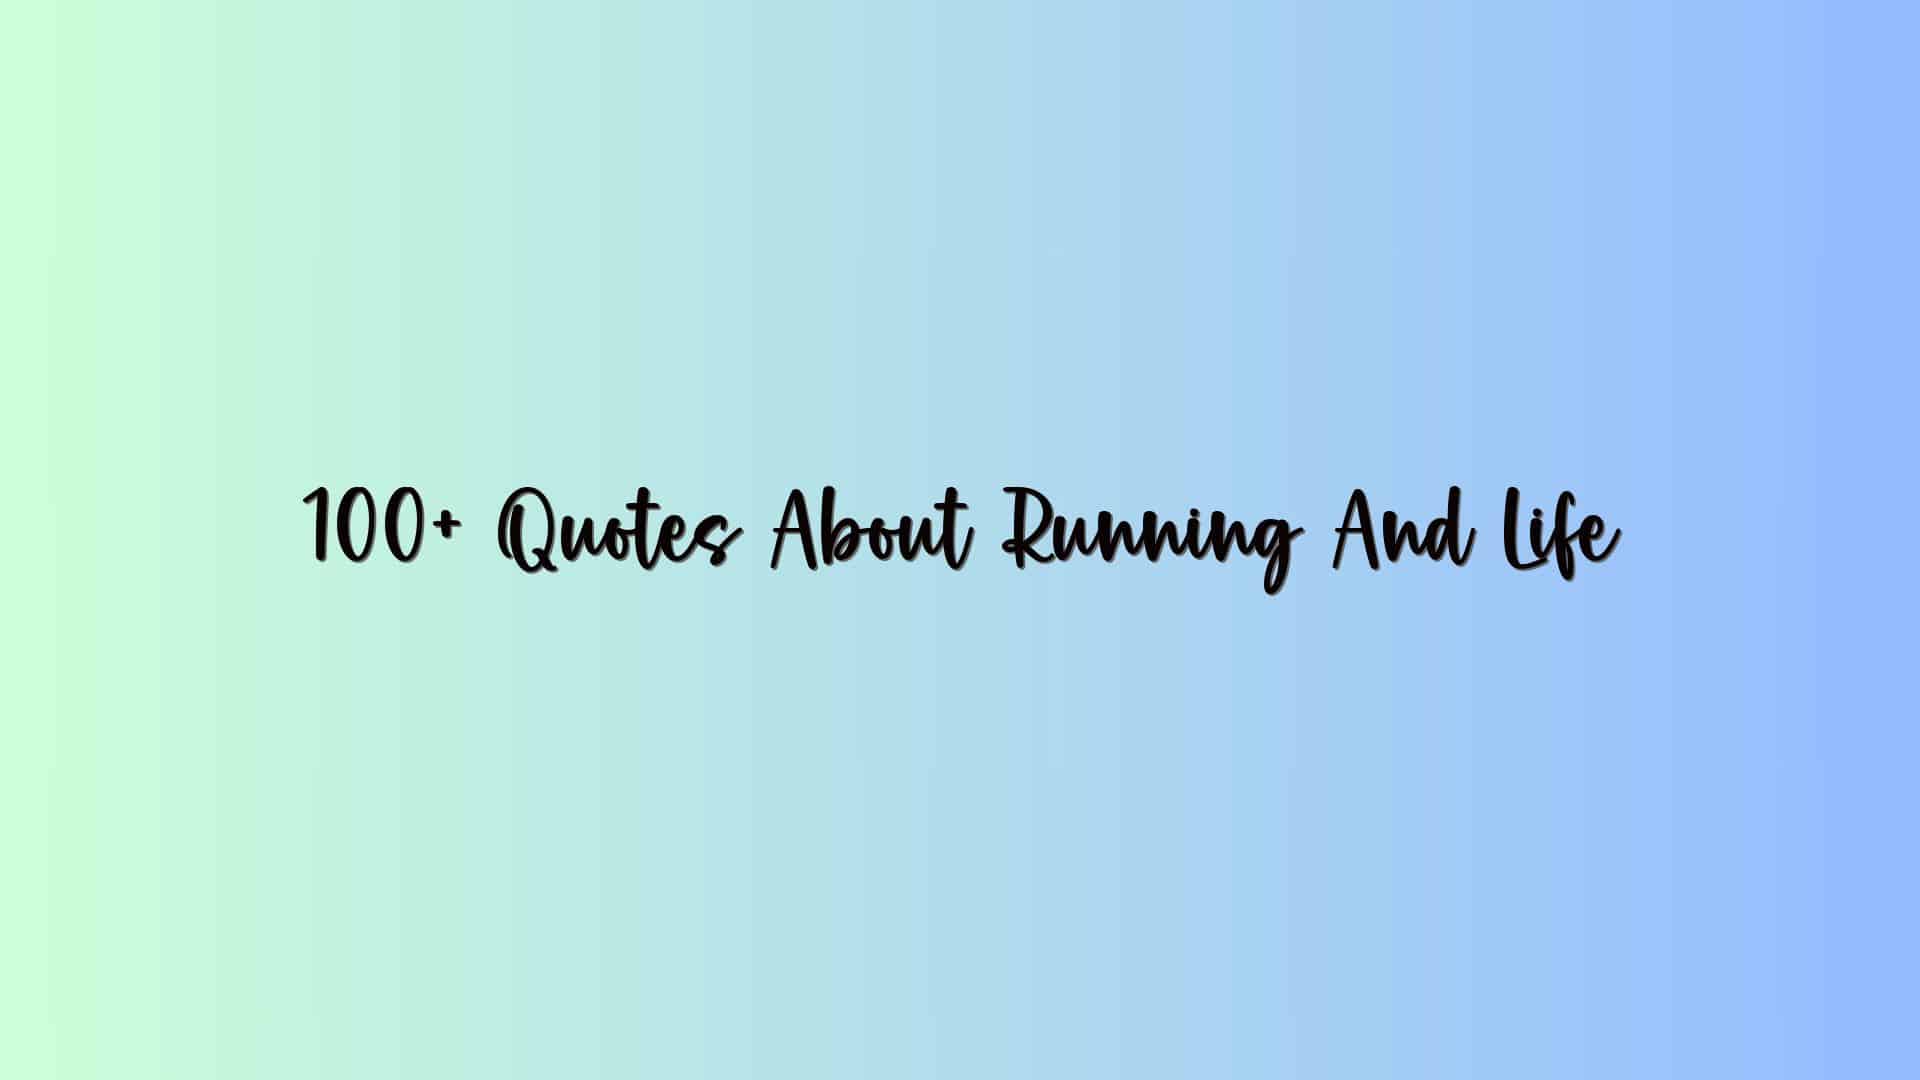 100+ Quotes About Running And Life